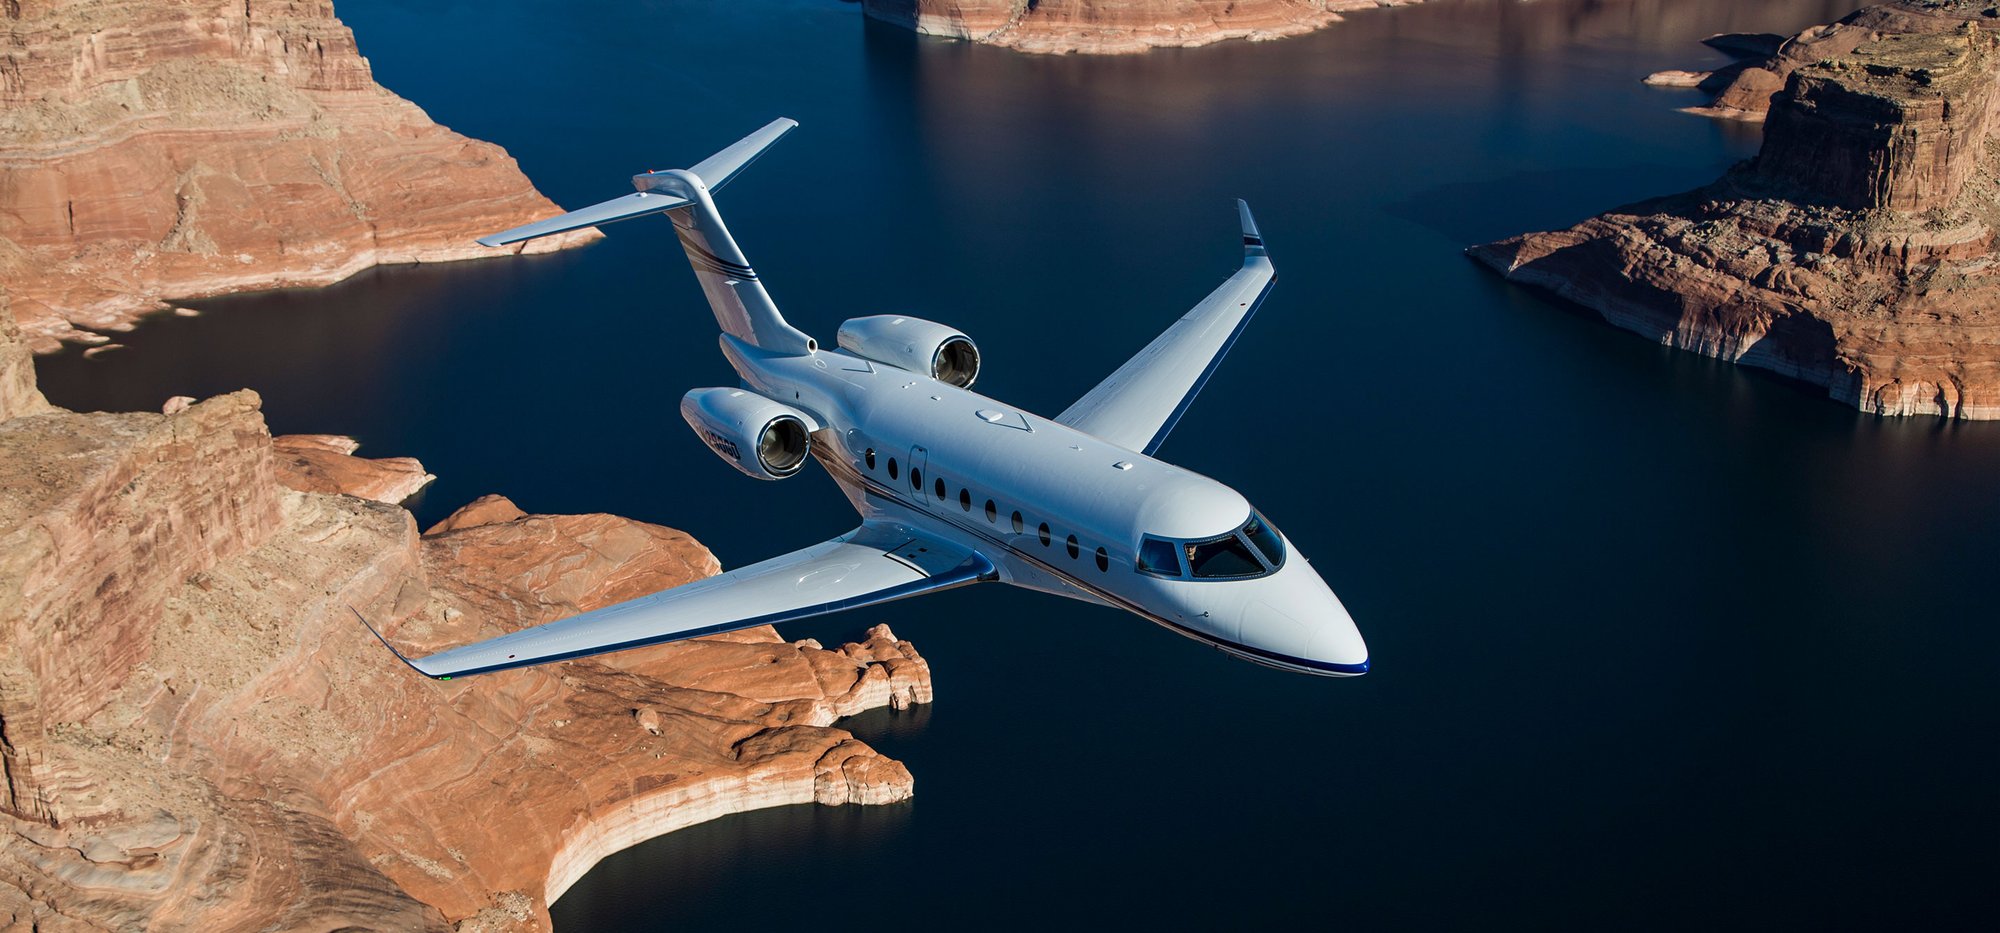 Gulfstream flying over sea and red canyons